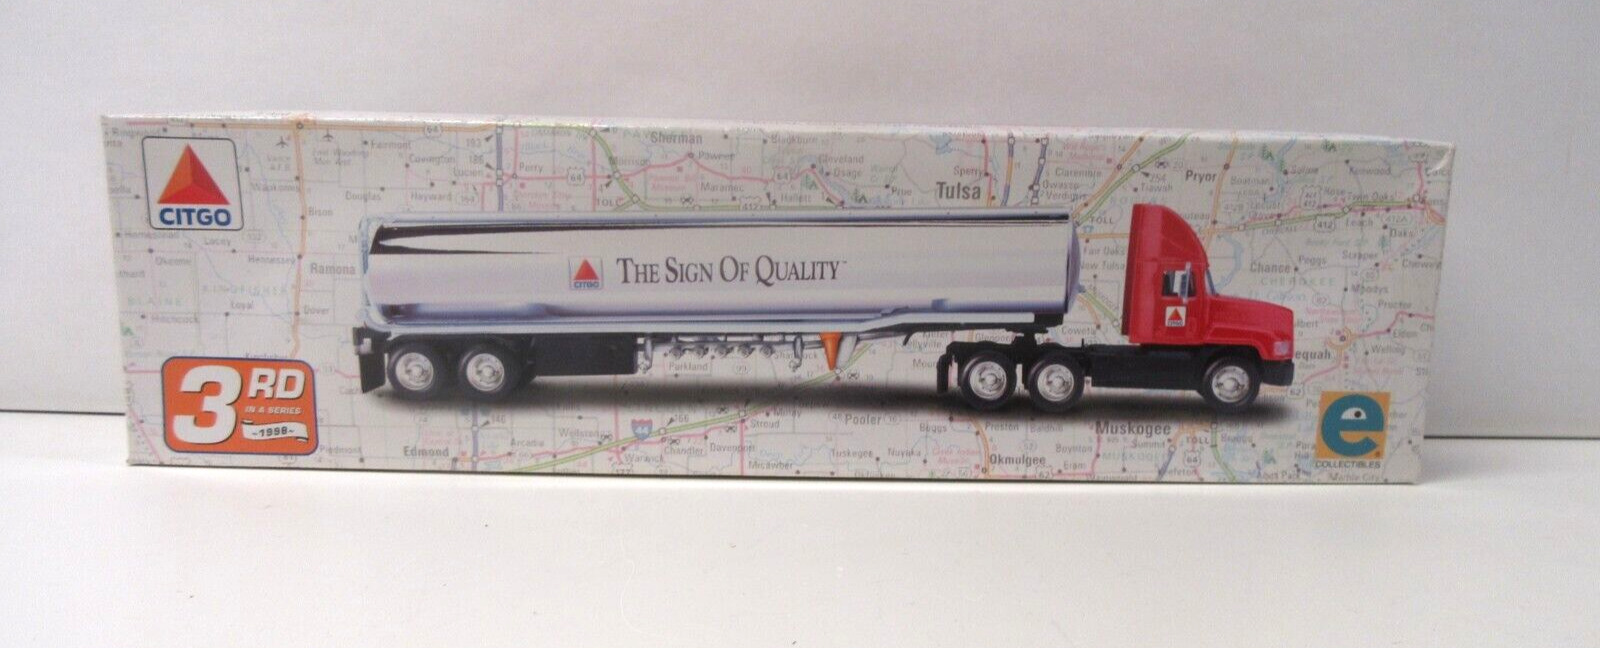 1998 Citgo 1961 Die Cast Tanker Truck w/Rubber Tires See Pics